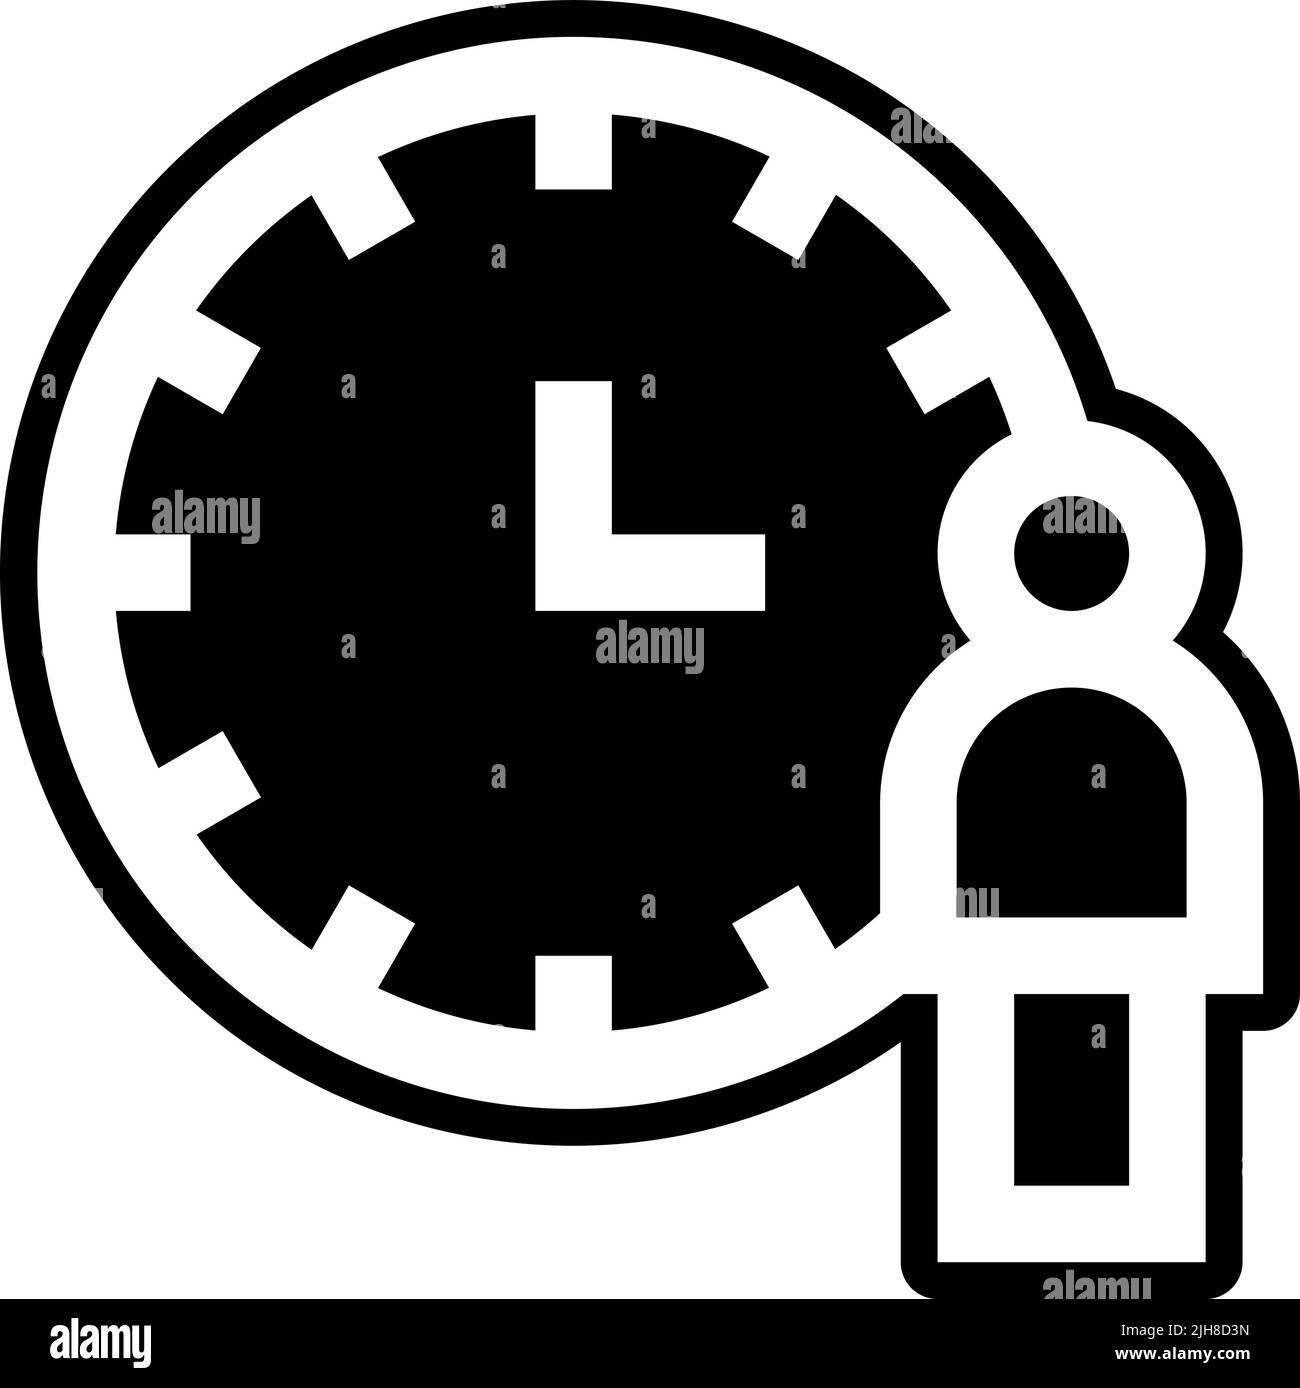 Time management set two waiting icon Stock Vector